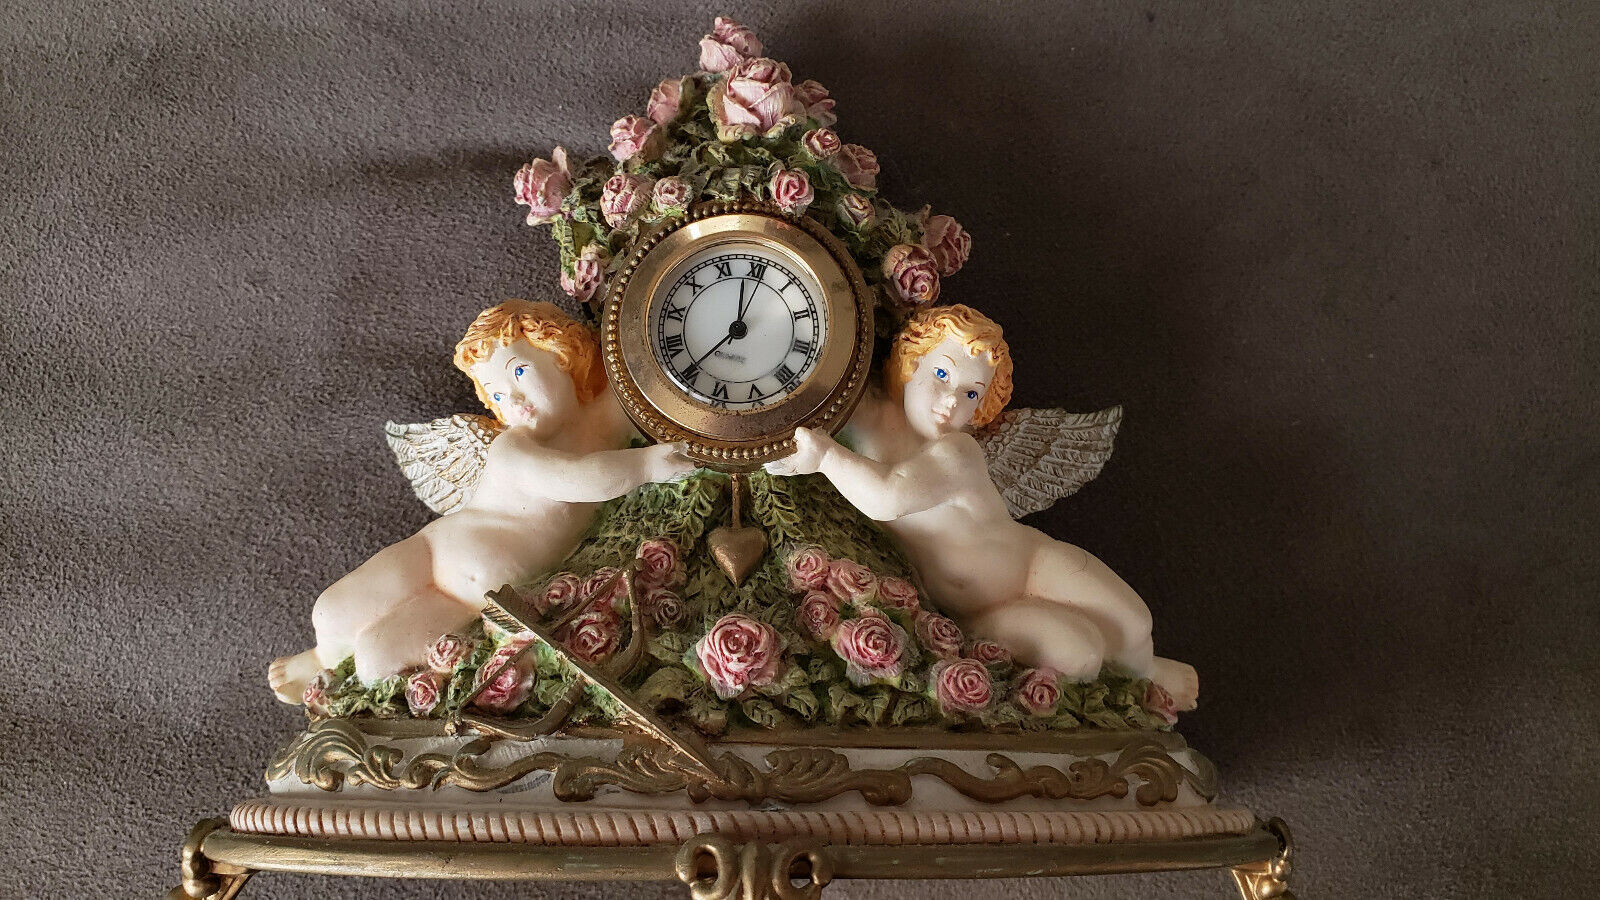 Rare Vintage Mantel Clock w Cherubs/Angels. Time for Love by Winslow.